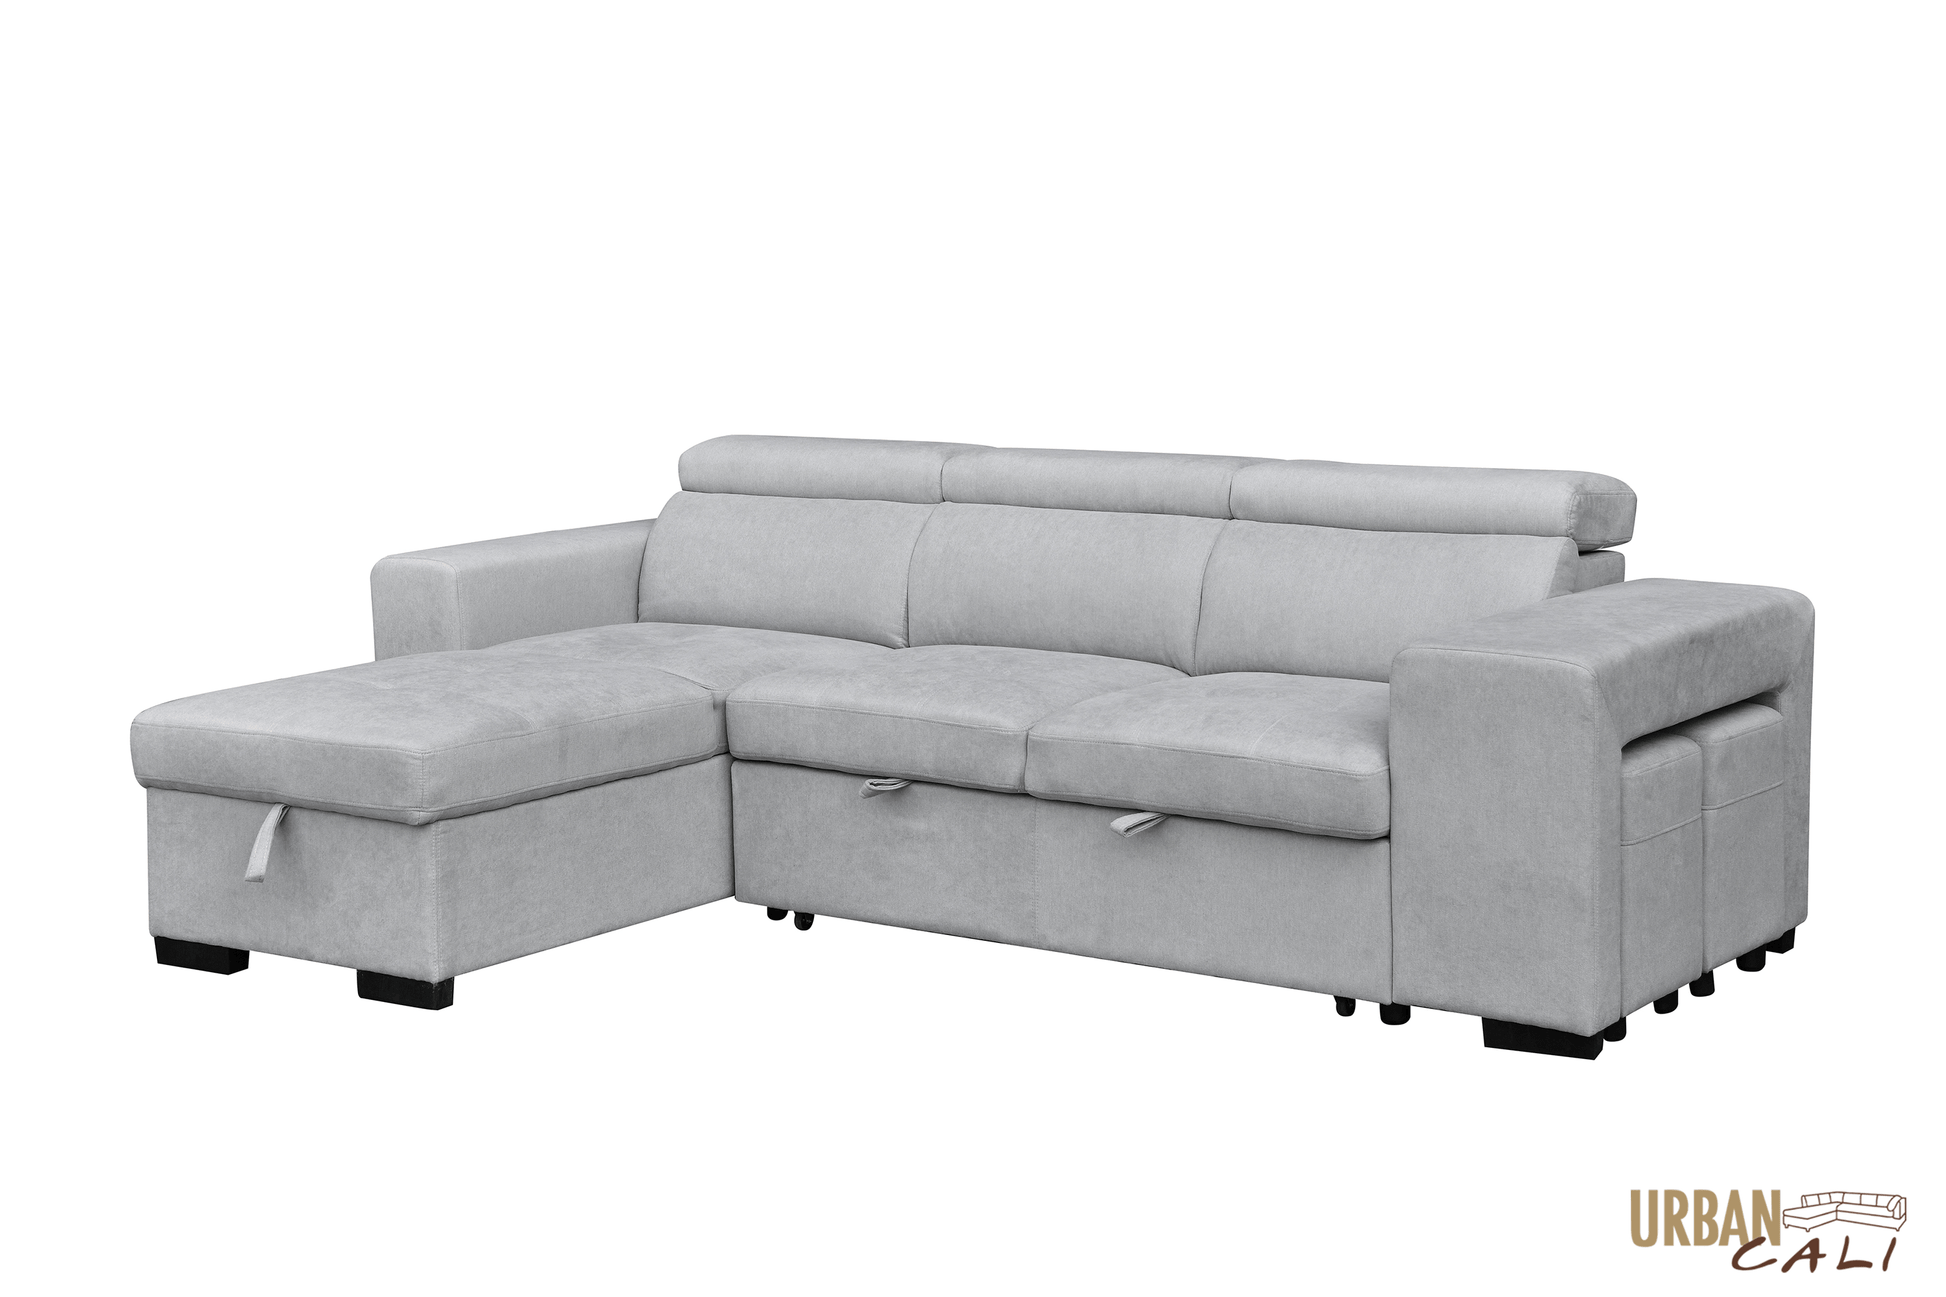 Urban Cali Sectional Sonoma Sleeper Sectional Sofa Bed with Reversible Storage Chaise and 2 Stools in Canvas Grey